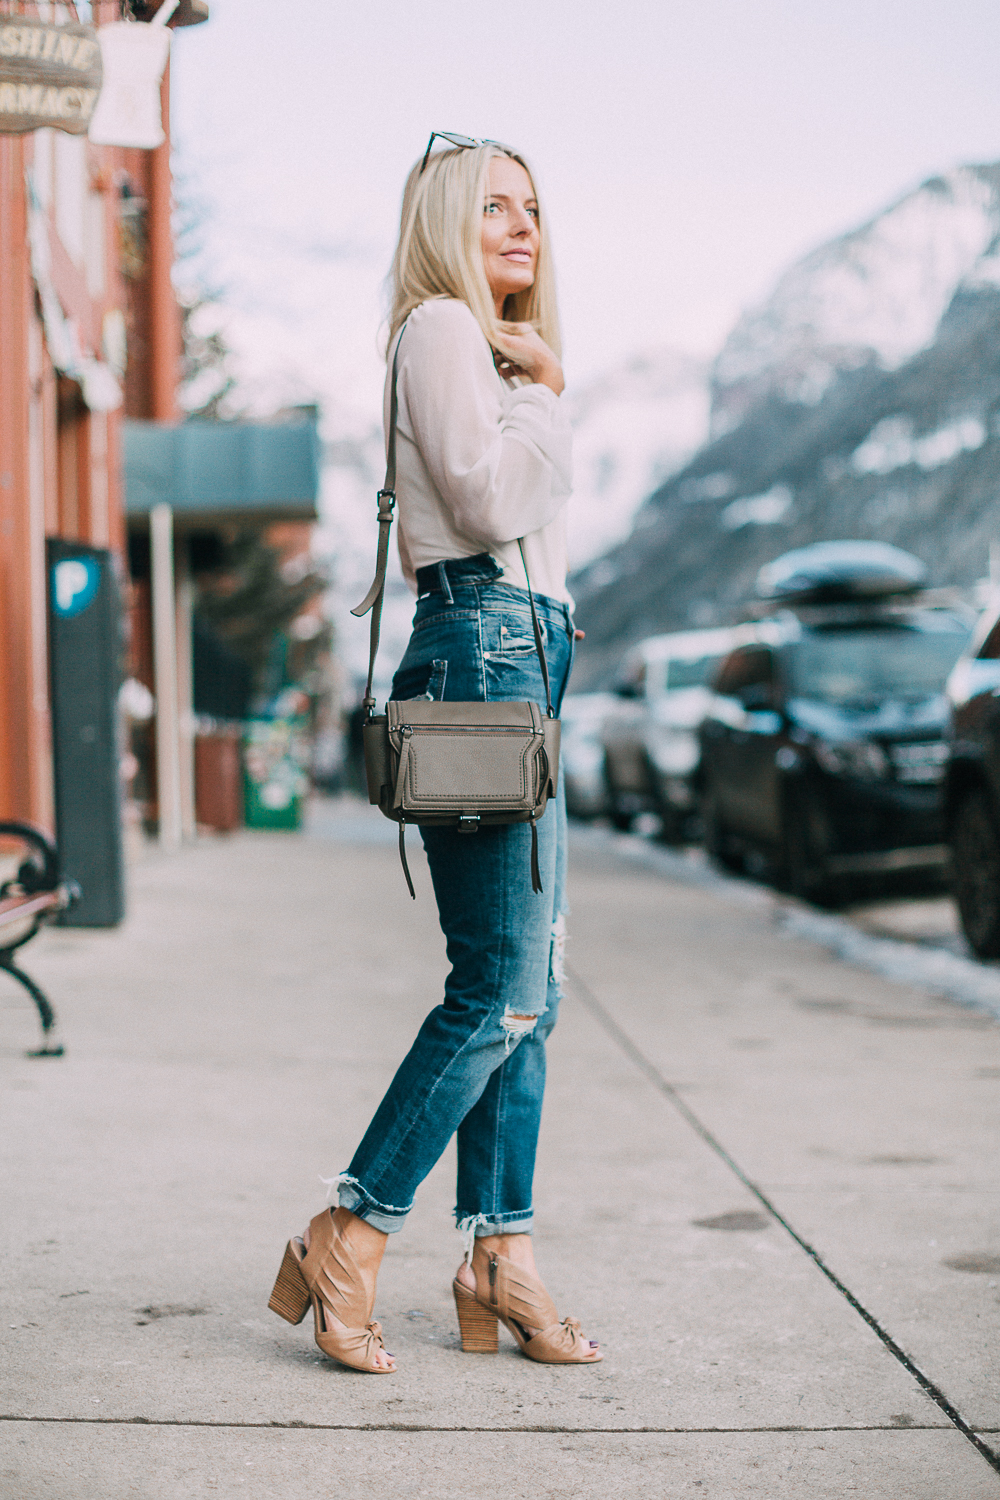 blonde fashion blogger over 40 wearing nude vince camuto kerra sandals carrying dot crossbody bag